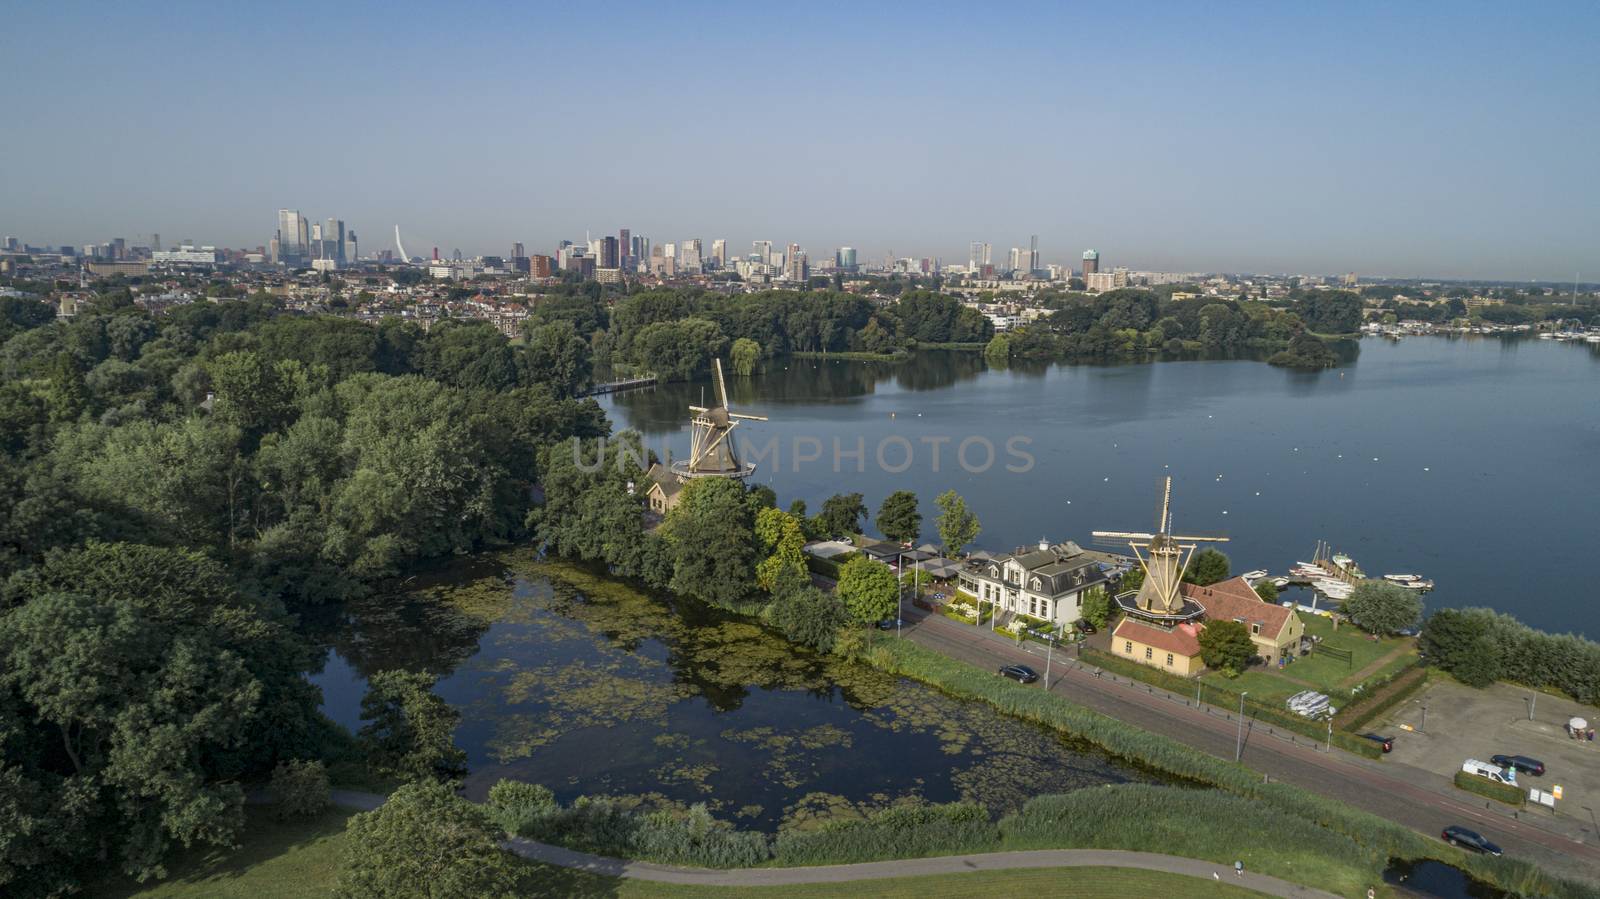 Dutch mill in early morning light. View on the skyline of Rotterdam as seen from the Kralingse Bos